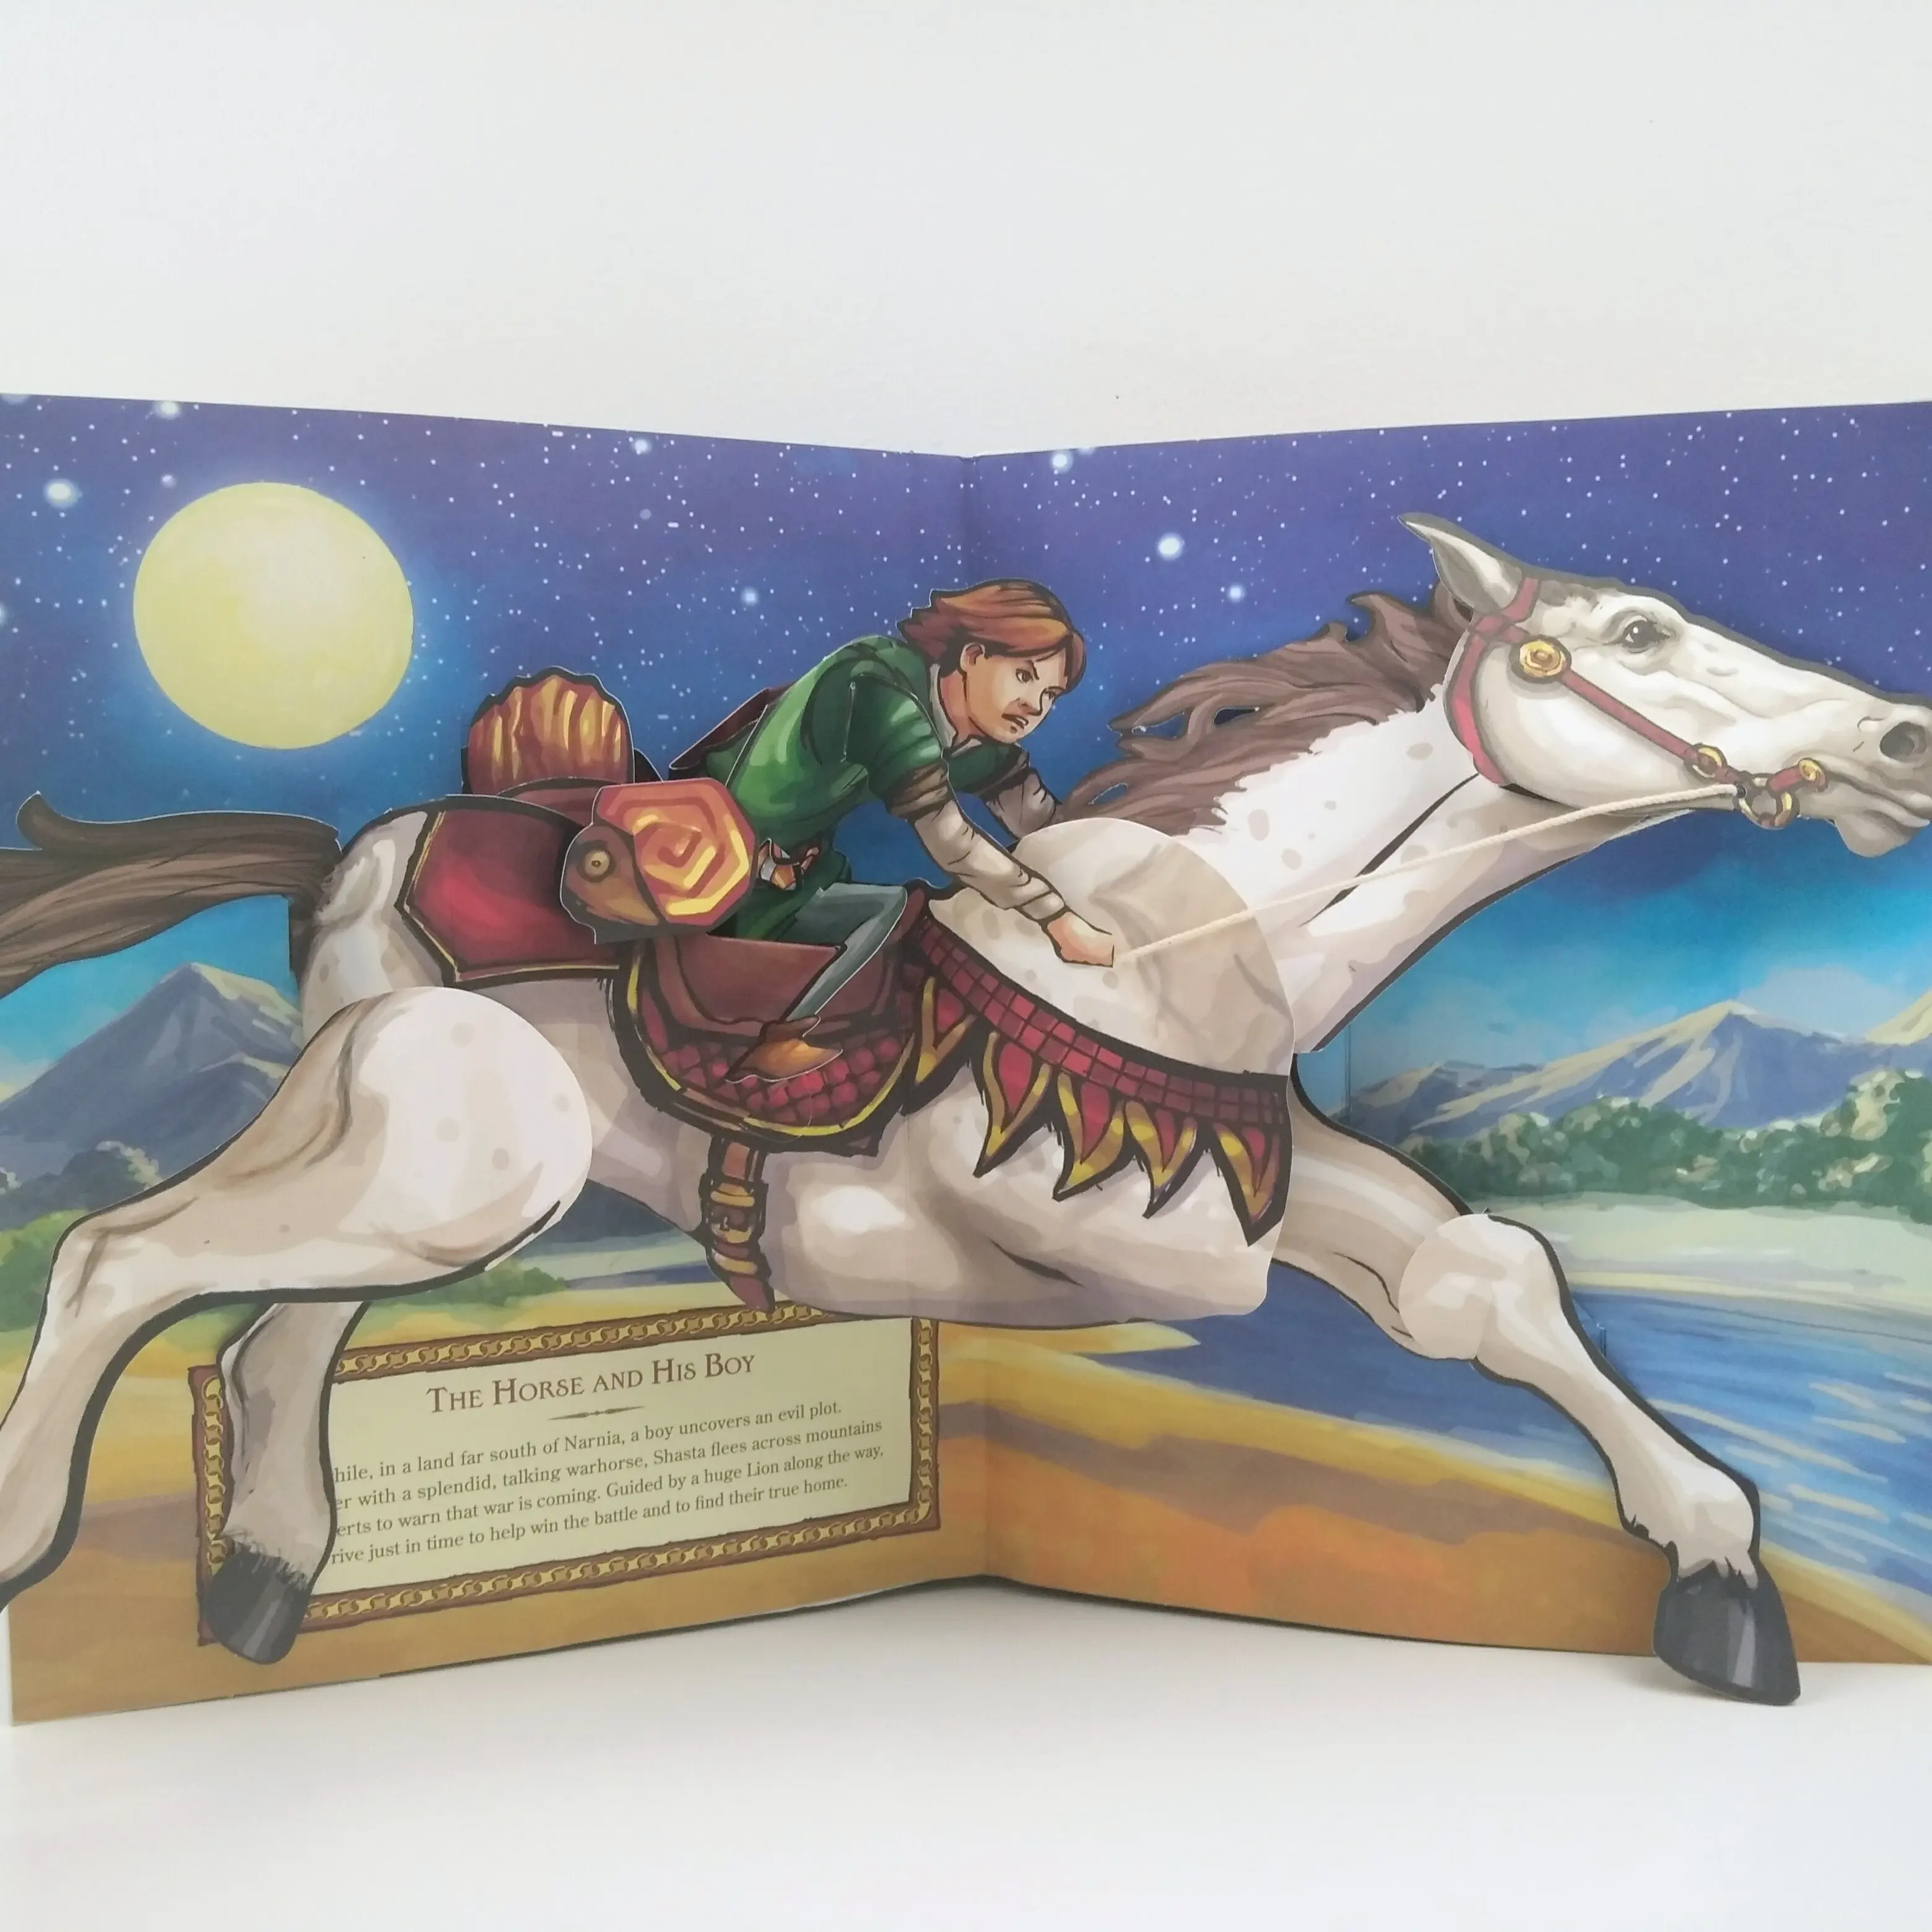 3d Pop Up Books Printing 3d Pop Up Book Kids Story Printing On Demand Stori Book High Quality Hardcover Animal For Child Board Book Offset Printing